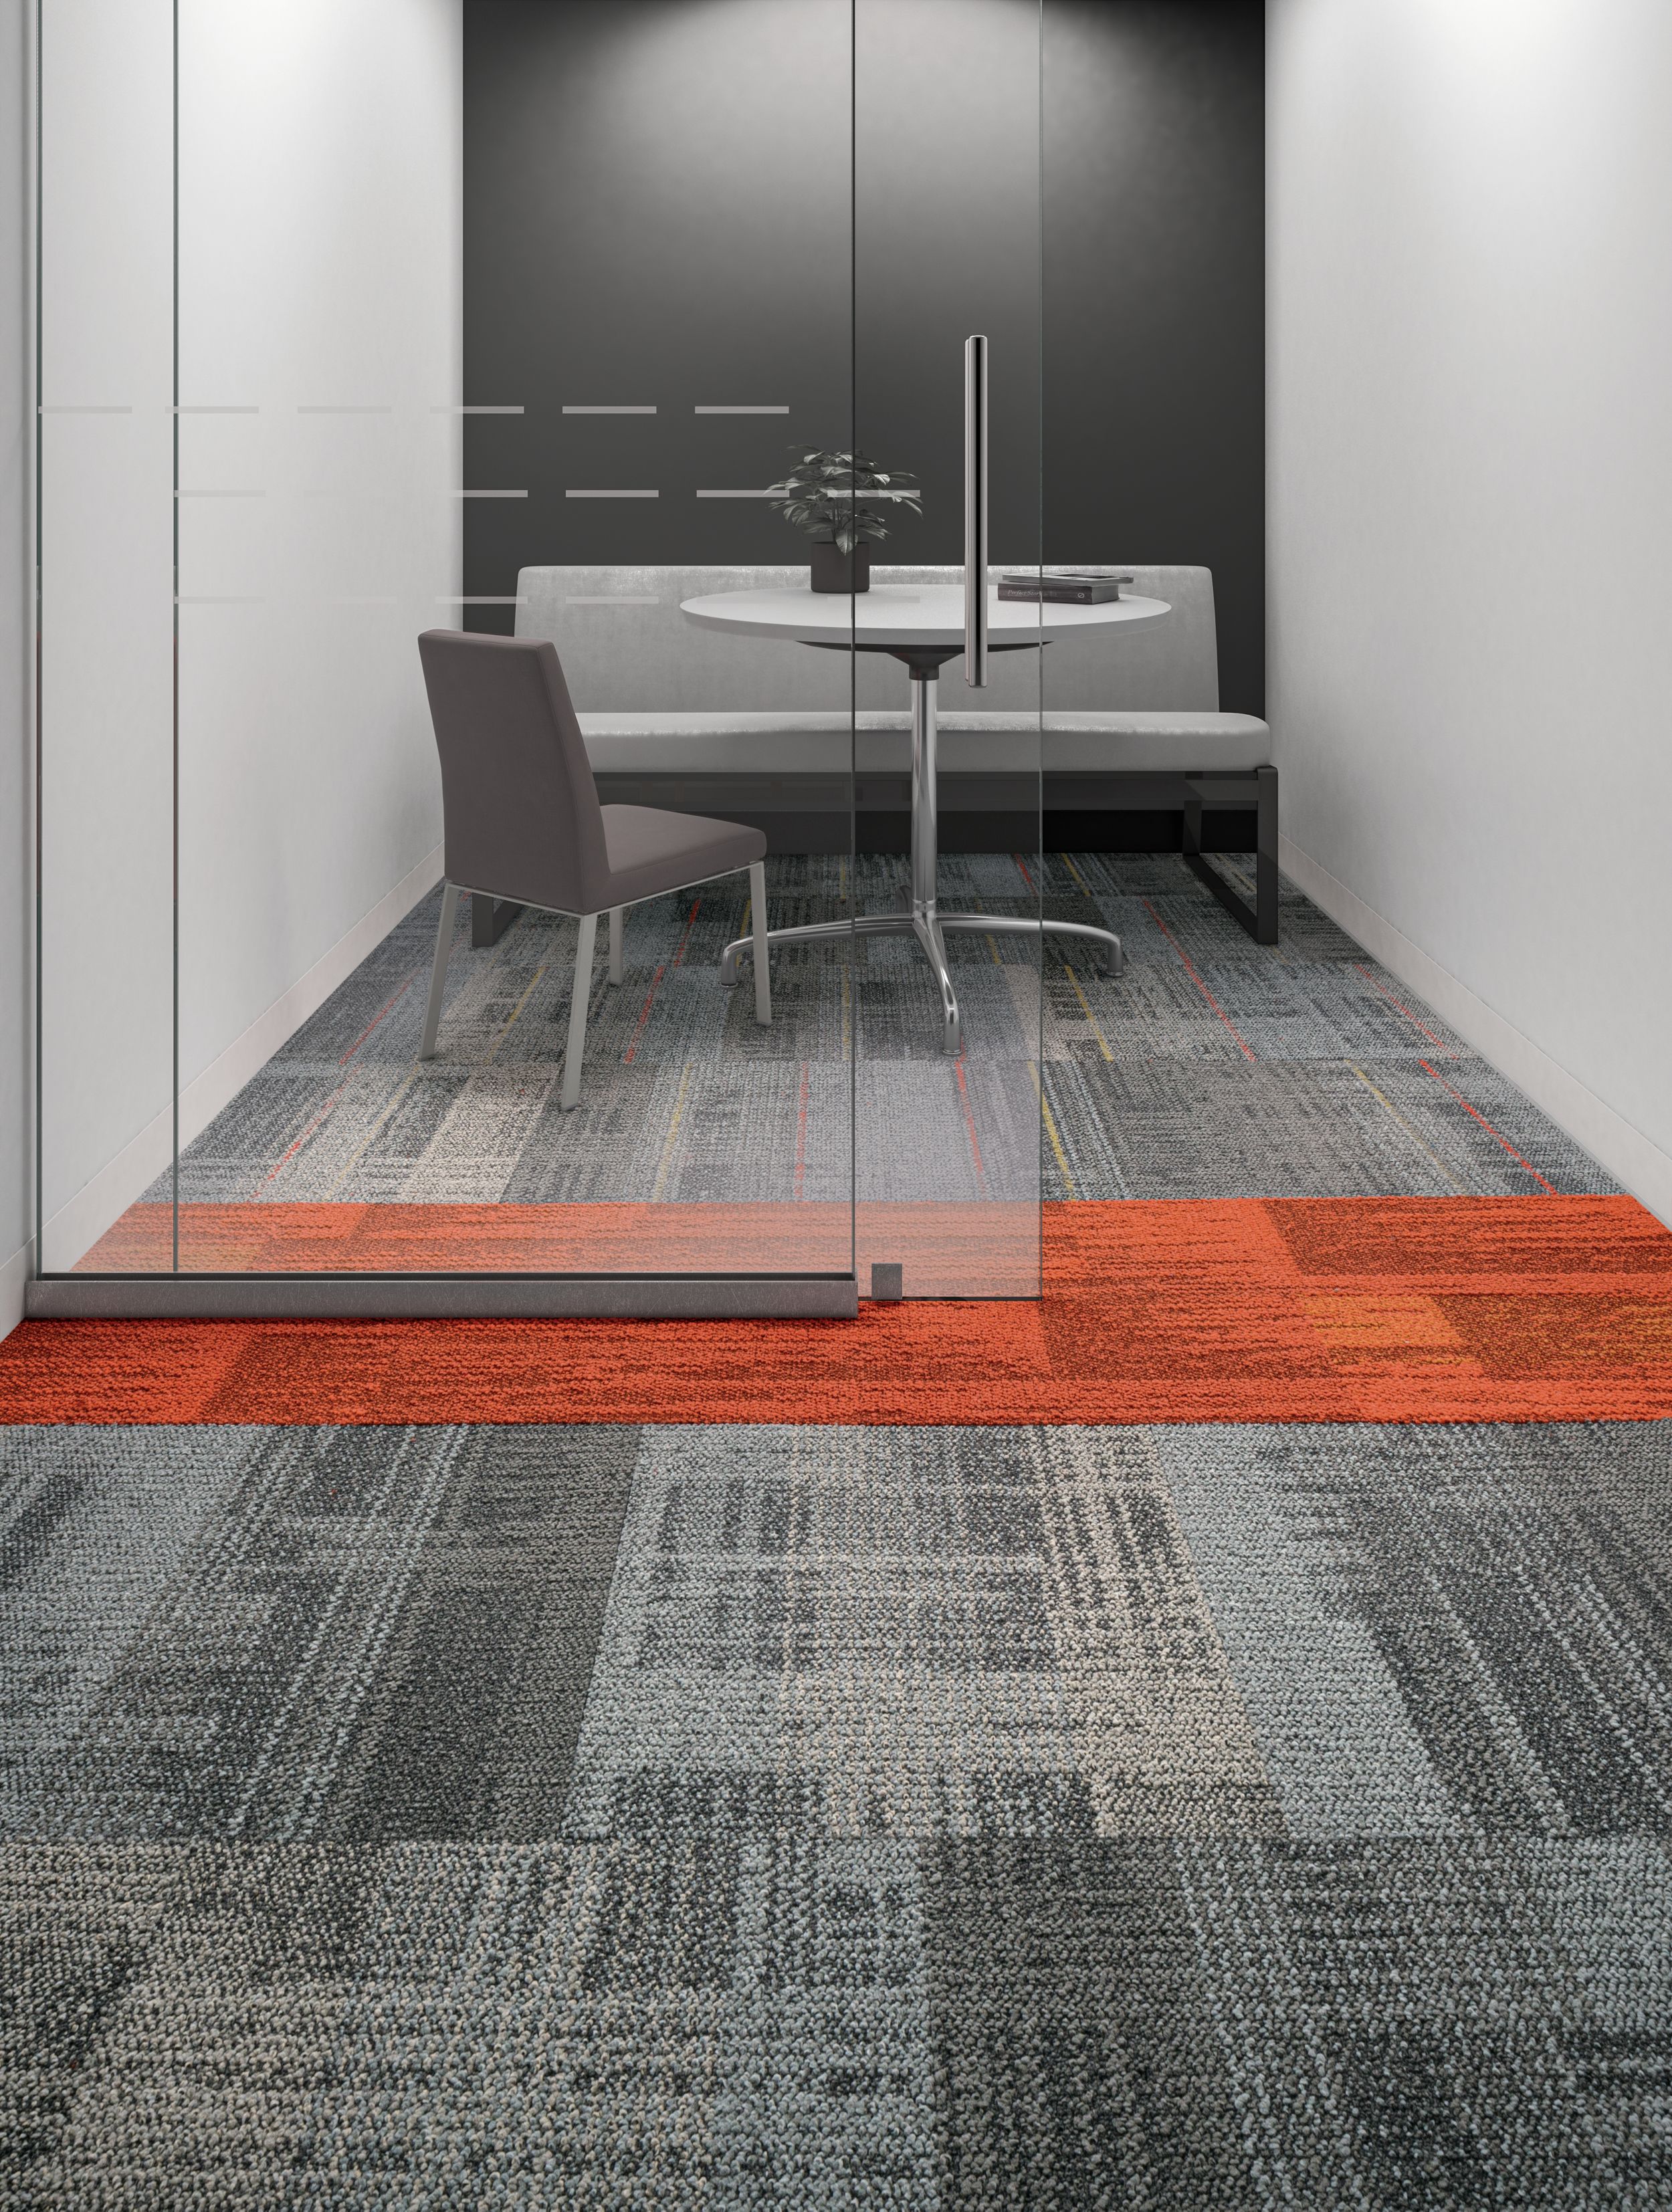 Interface AE312 and AE310 carpet tile with AE317 plank carpet tile in small meeting room imagen número 6